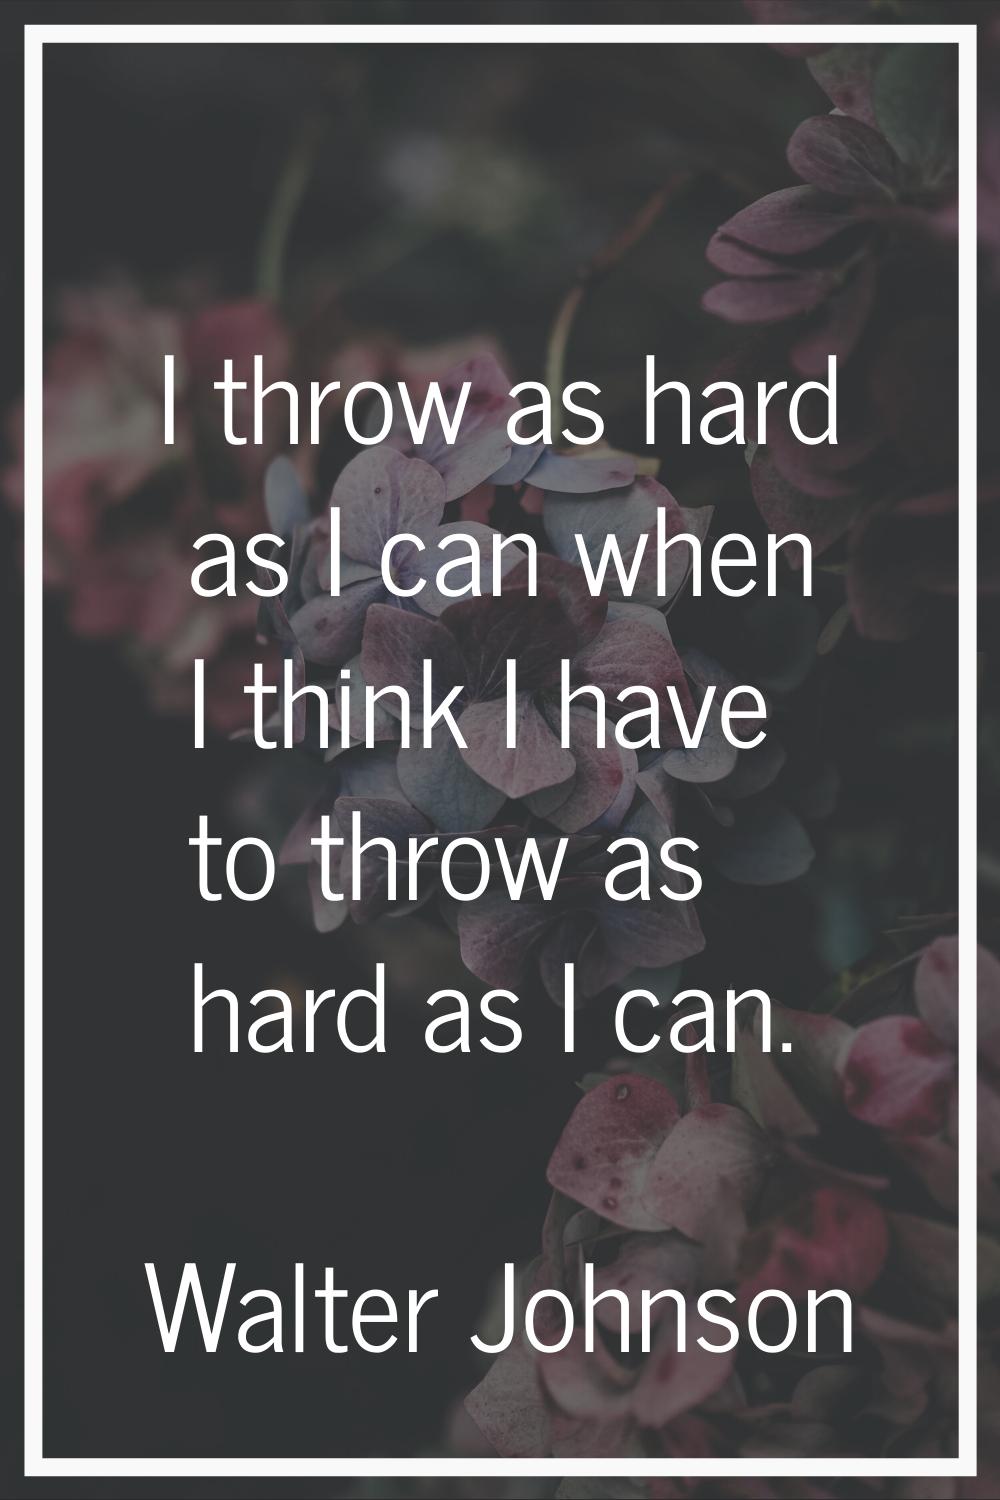 I throw as hard as I can when I think I have to throw as hard as I can.